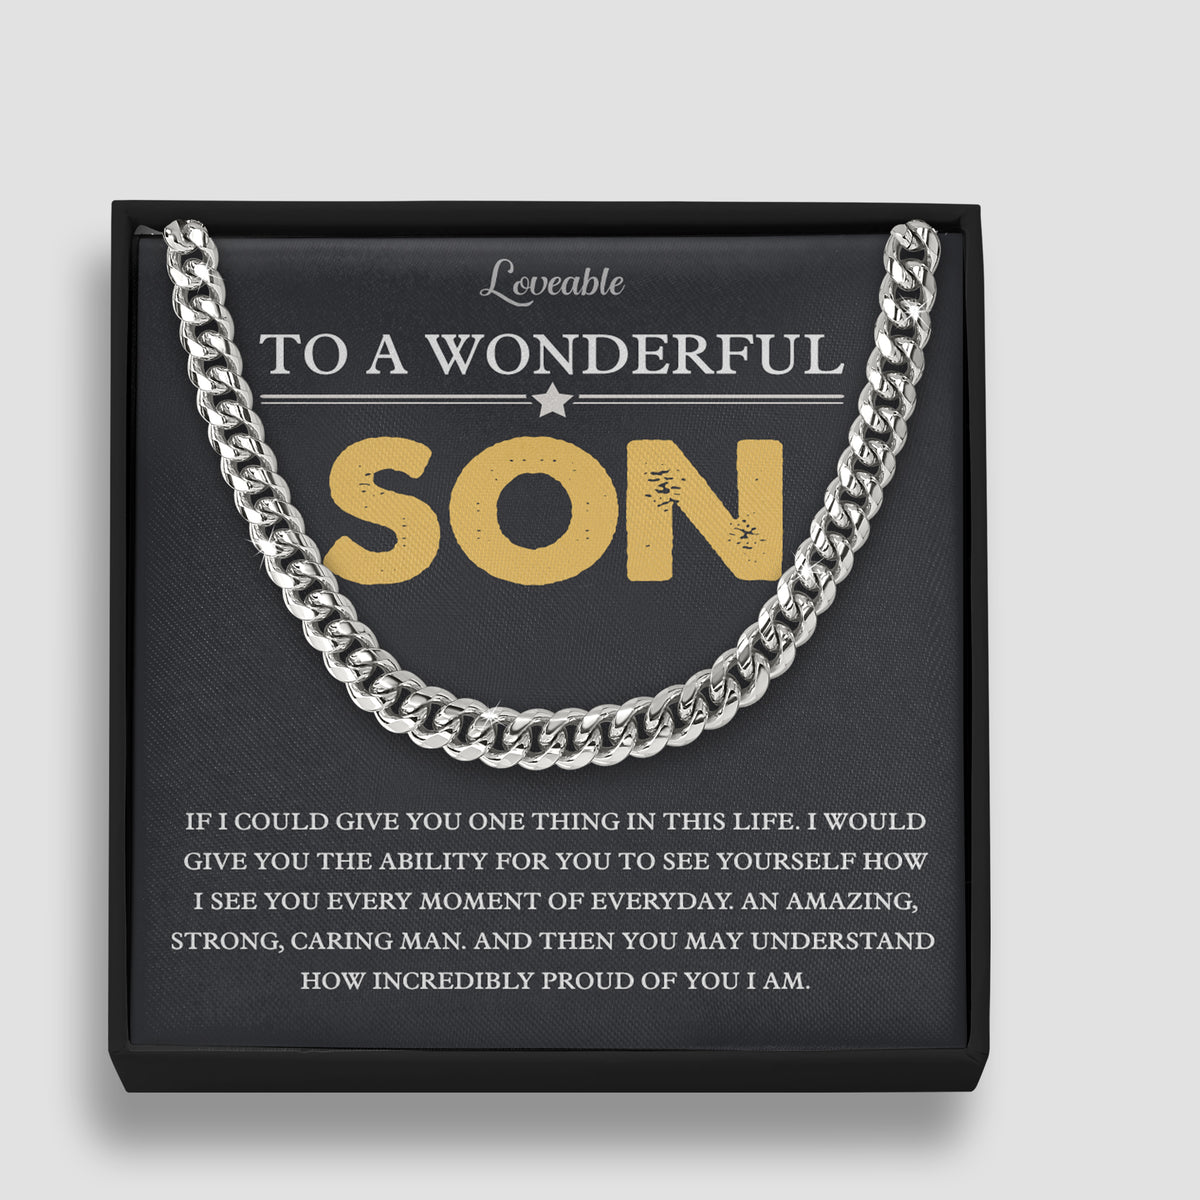 To A Wonderful Son - Best Meaningful Gift For Your Son